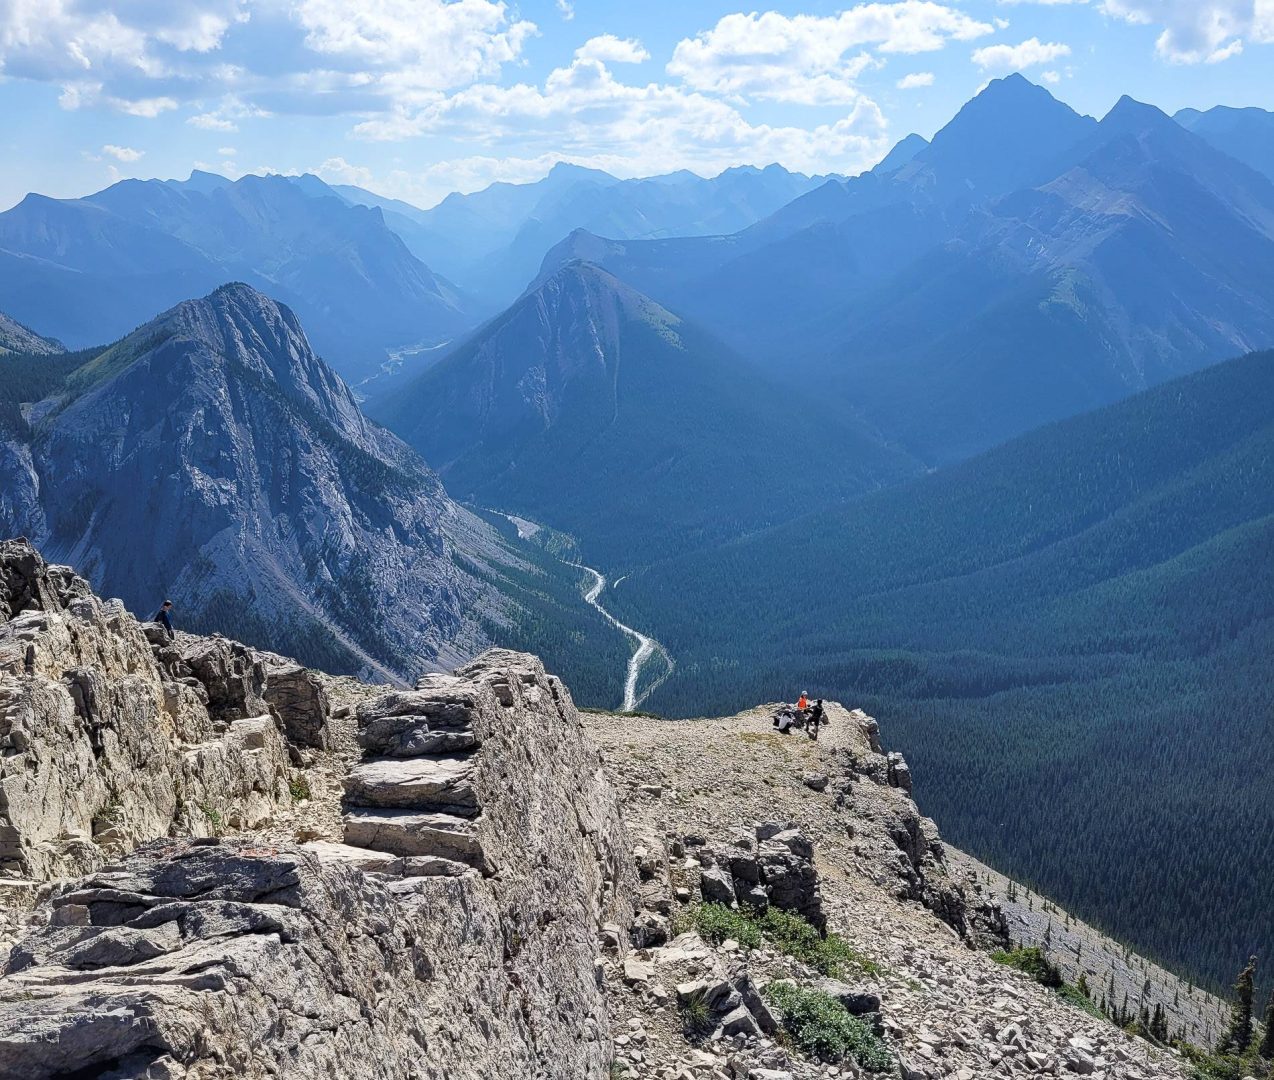 One of the views from the Sulphur Skyline Trail